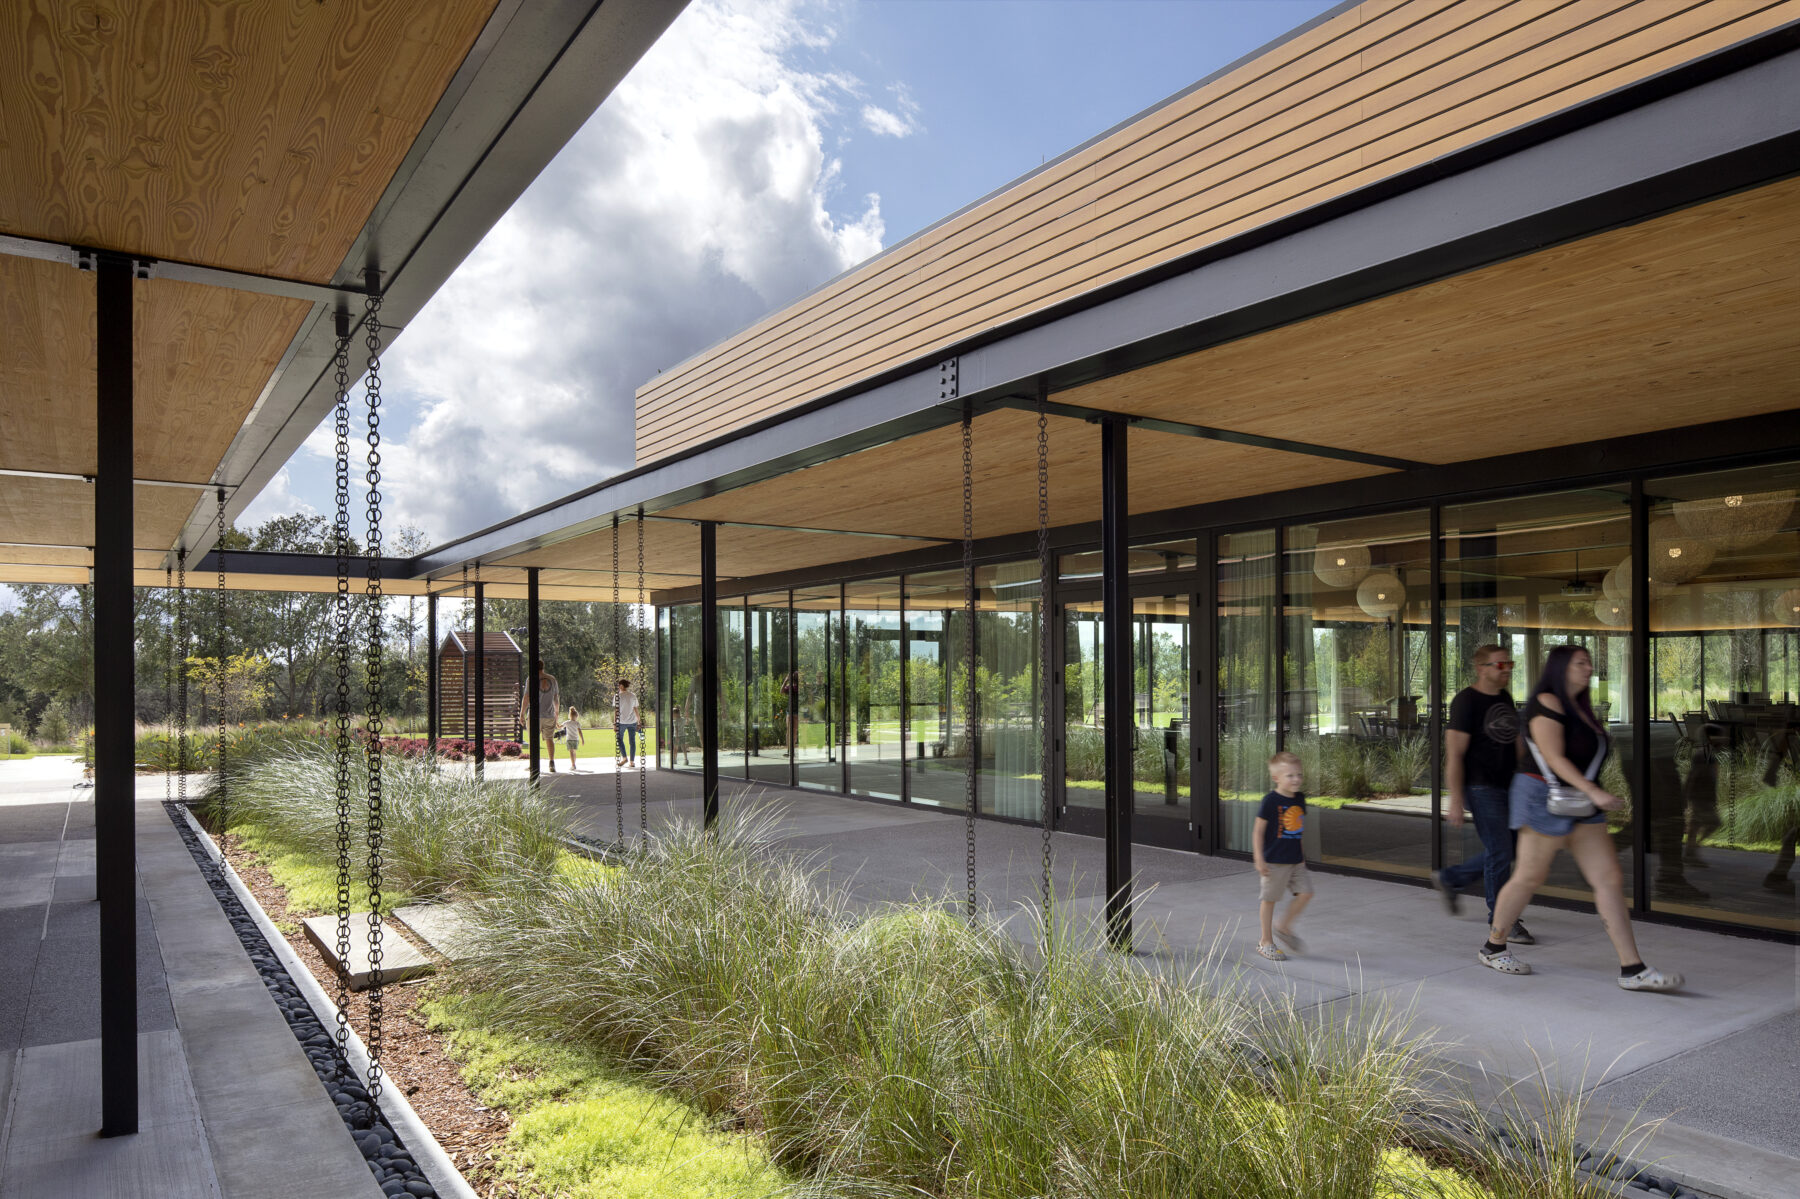 Photo of the water garden courtyard at the Bonnet Springs Park Event Center, showing its row of plantings watered by rain chains hanging from the Center's cross-laminated timber roof canopy.